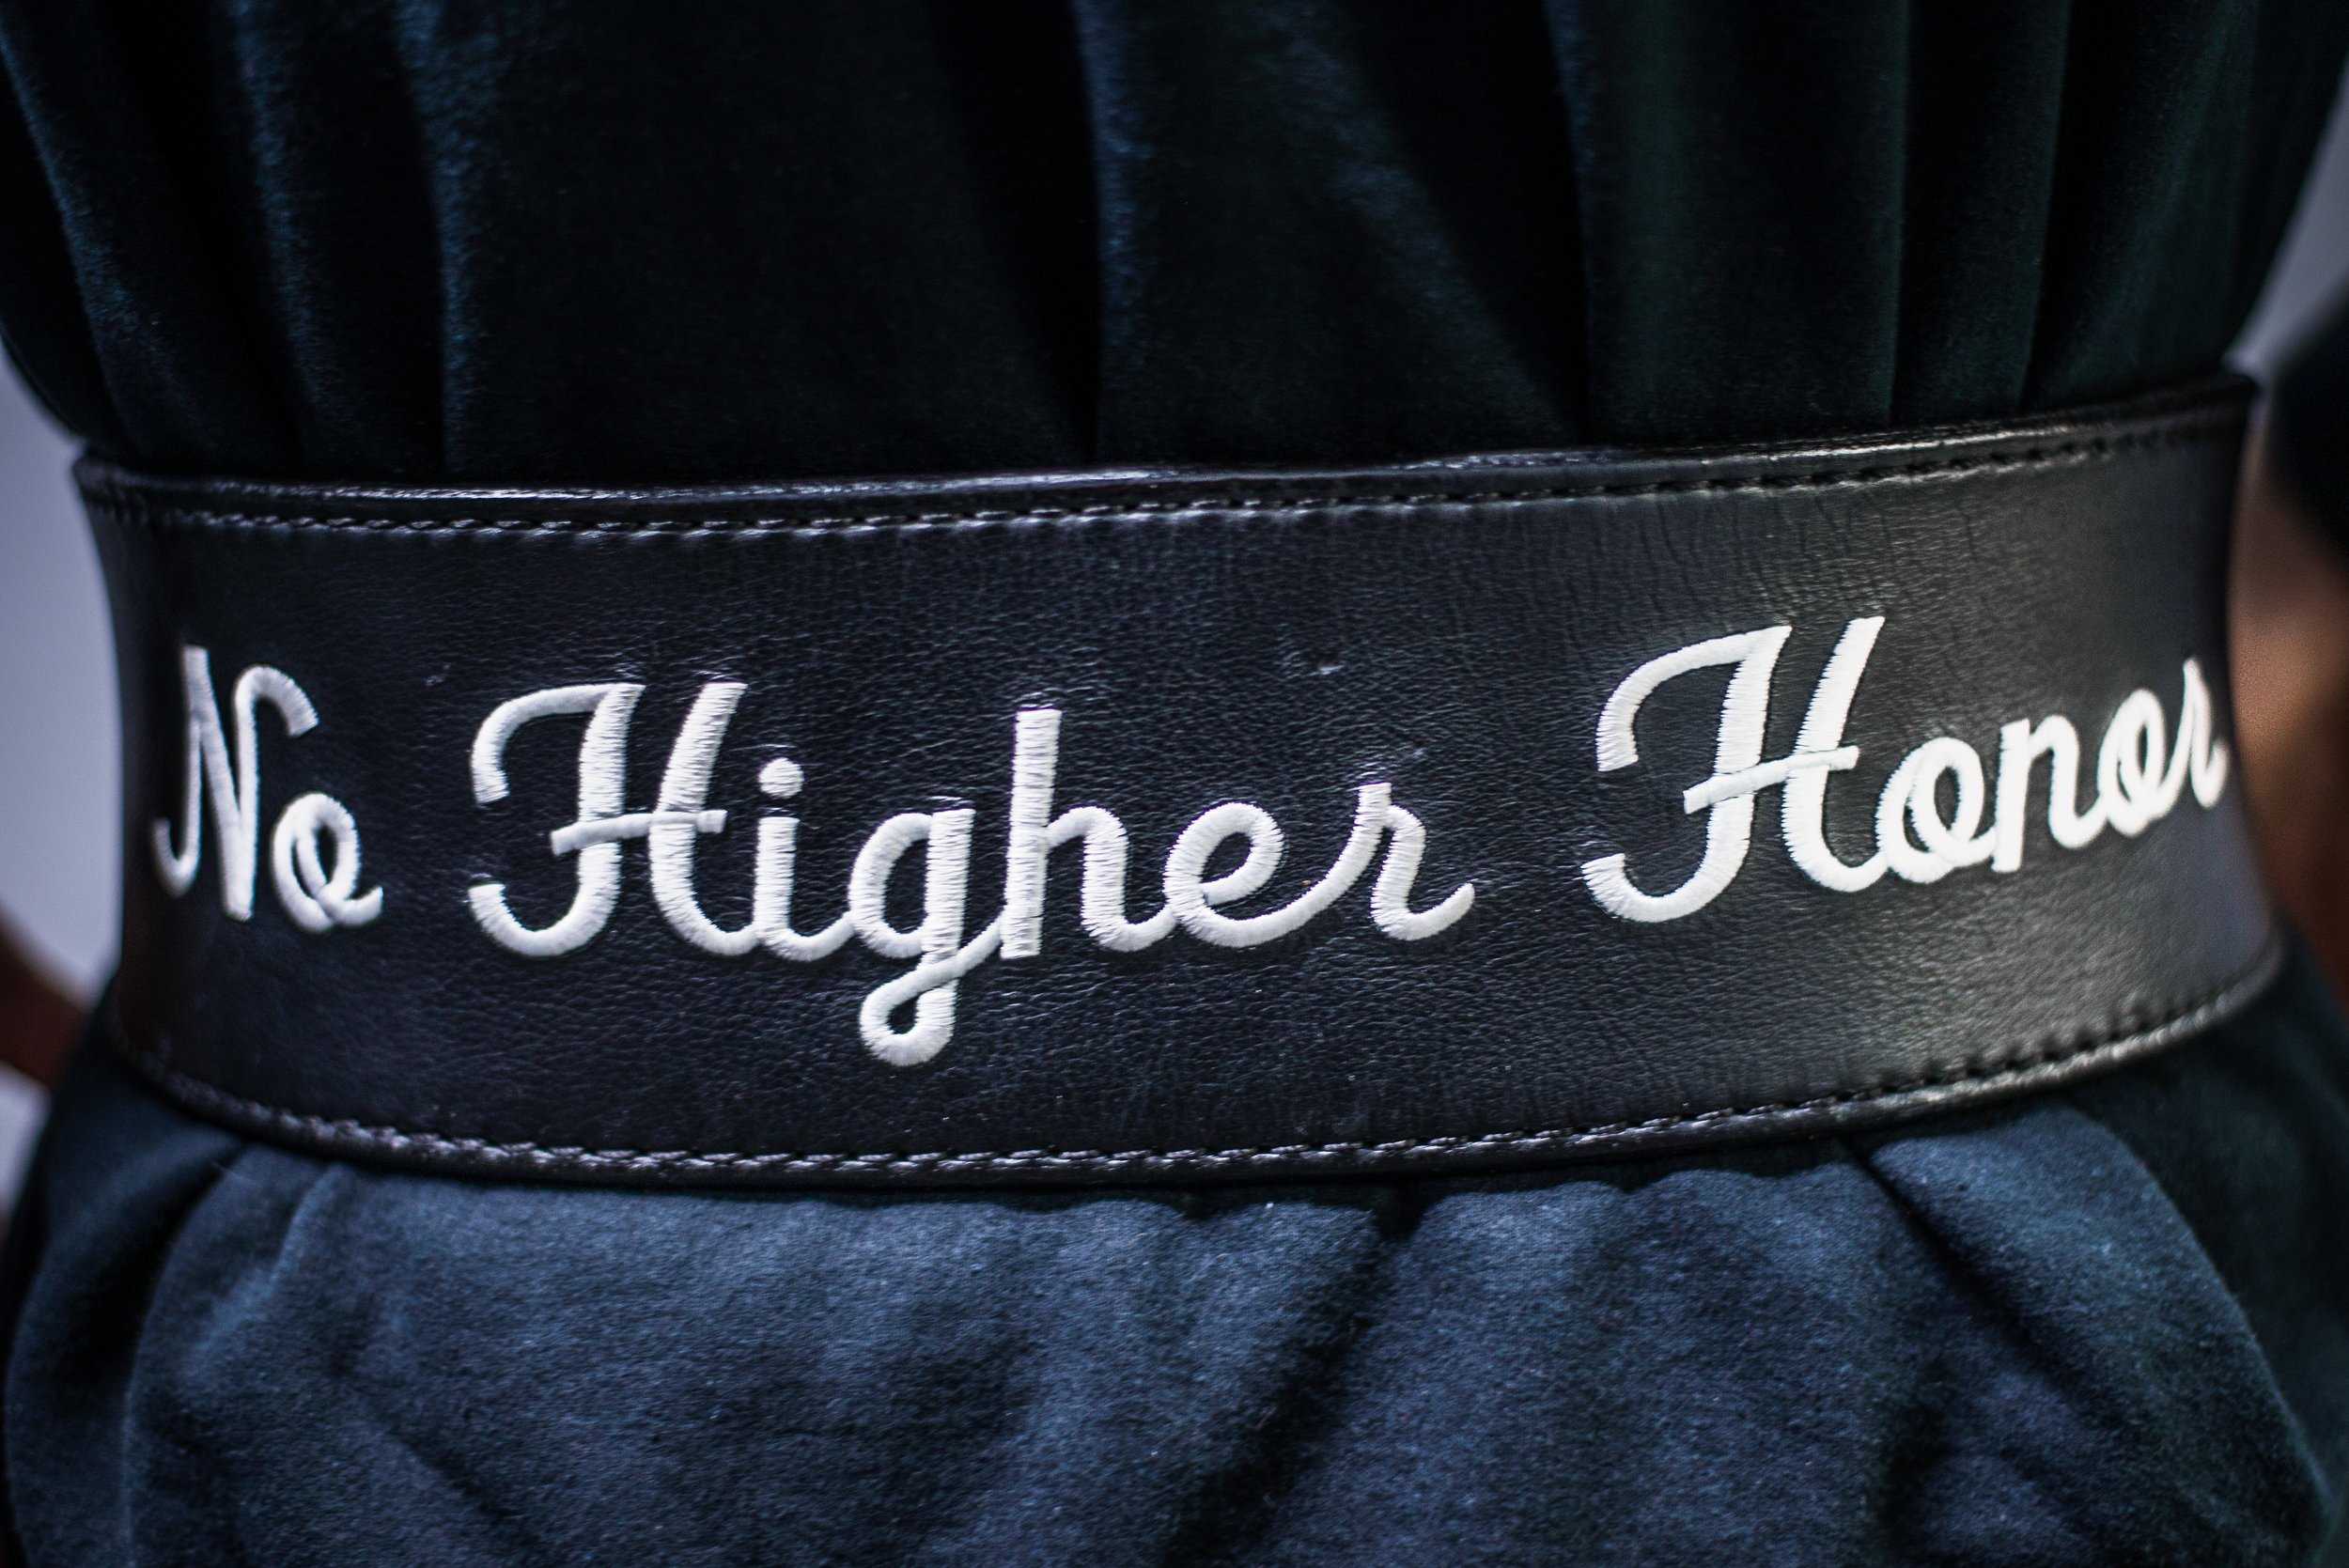  Brett's lifting belt reads "No Higher Honor", Oct. 9 at Mountain Town Fitness in Mount Pleasant, Michigan. Brett joined the Navy about 6 years ago. "I'm on a different course now where working for the government is probably something I never want to